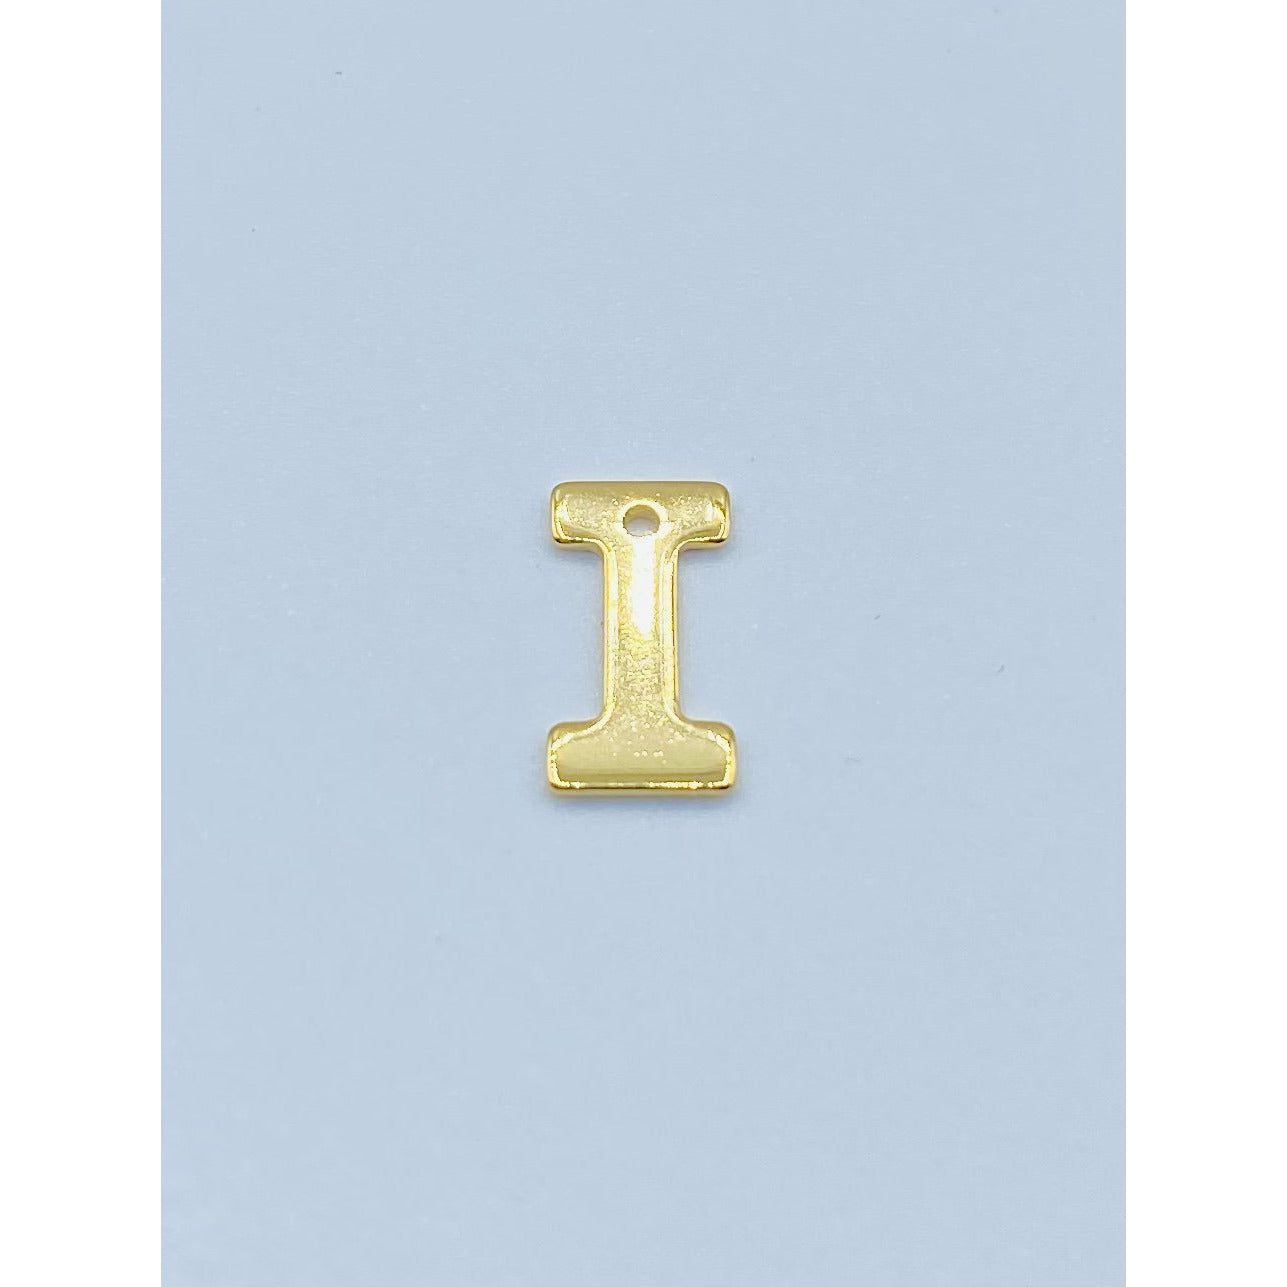 EXPRESS YOURSELF I-P BLOCK LETTER EARRING CHARM